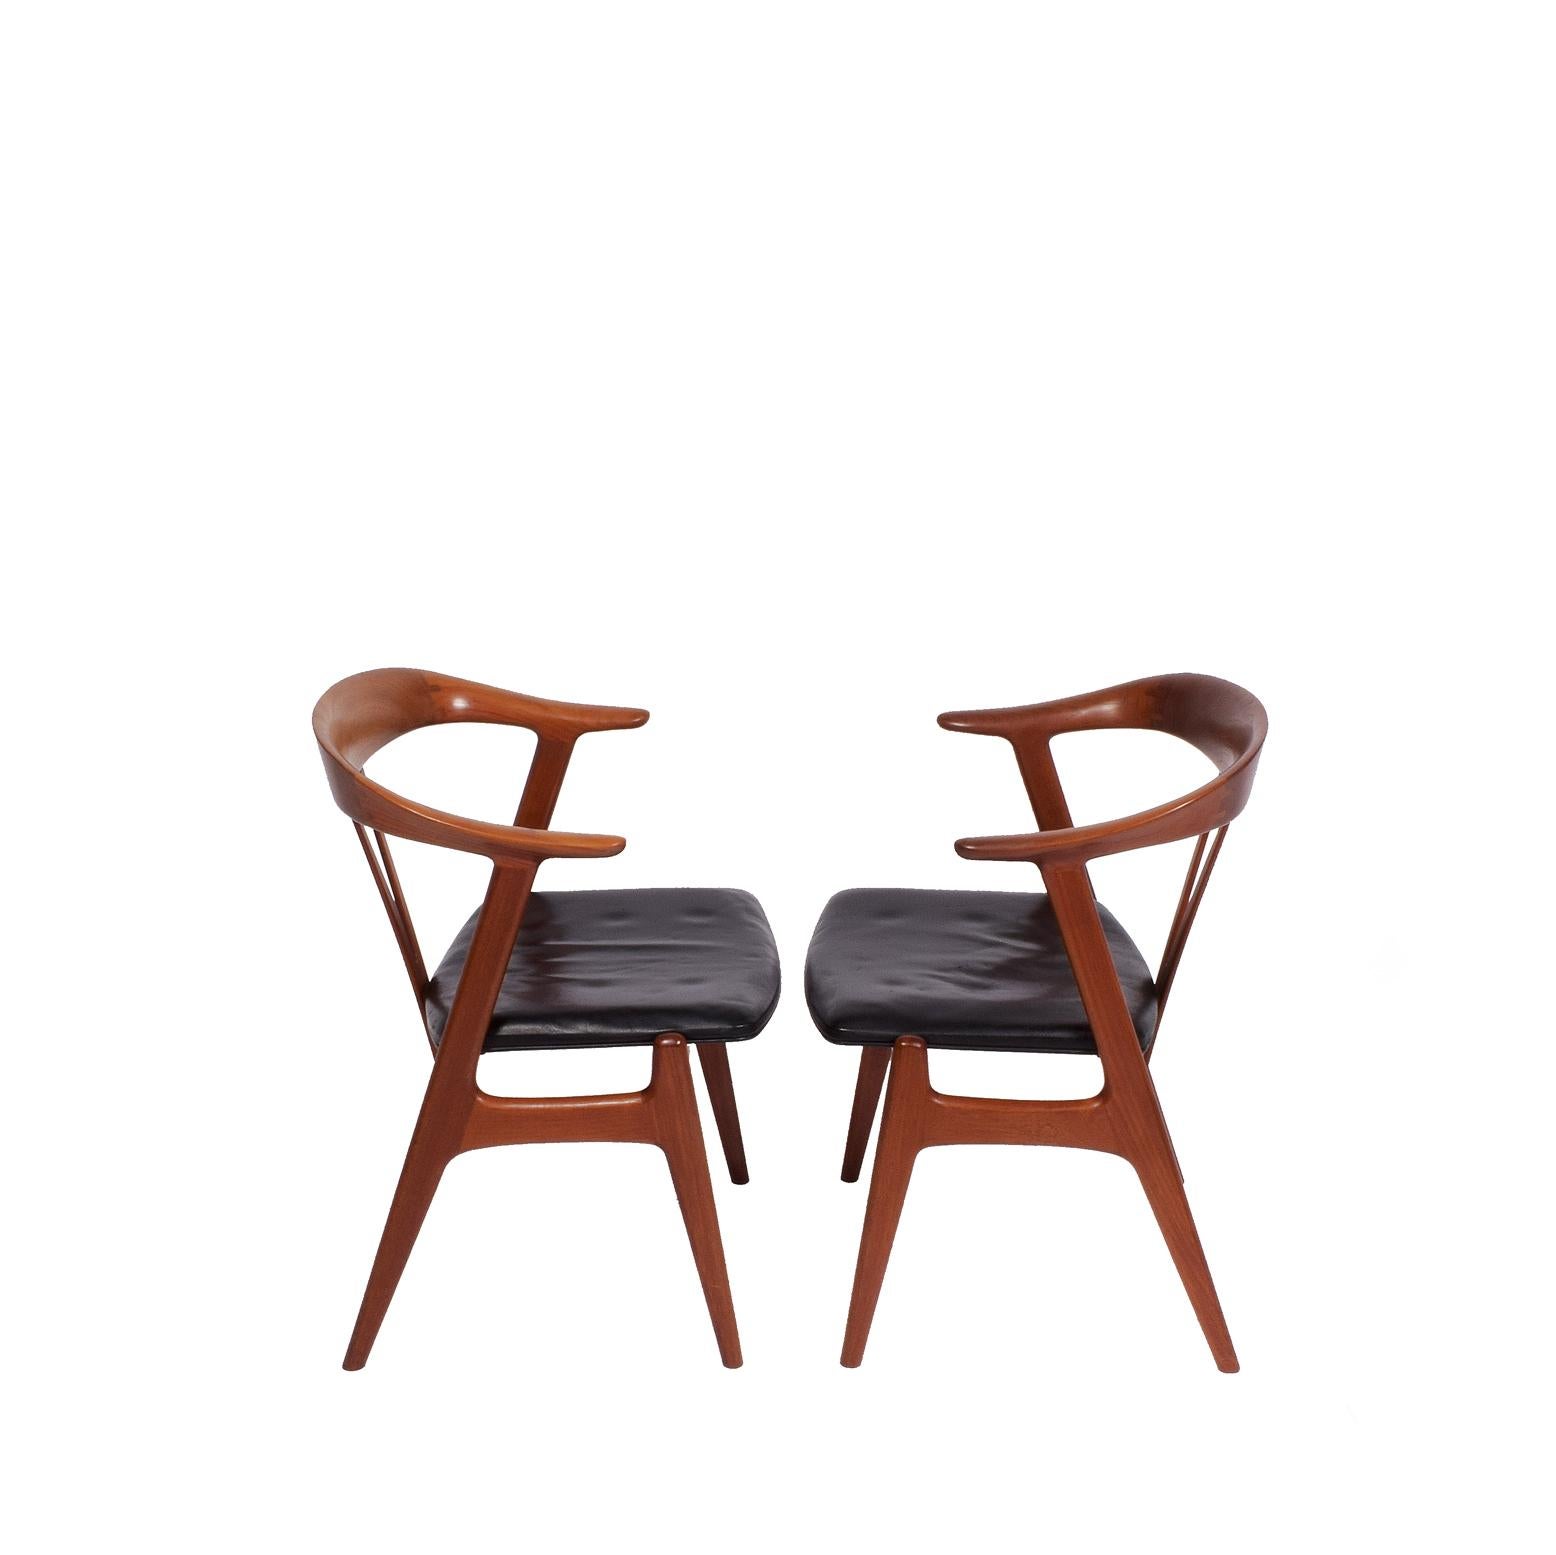 Solid teak armchairs with nice carpenter detail on the backs of the chairs, original black leather and condition.